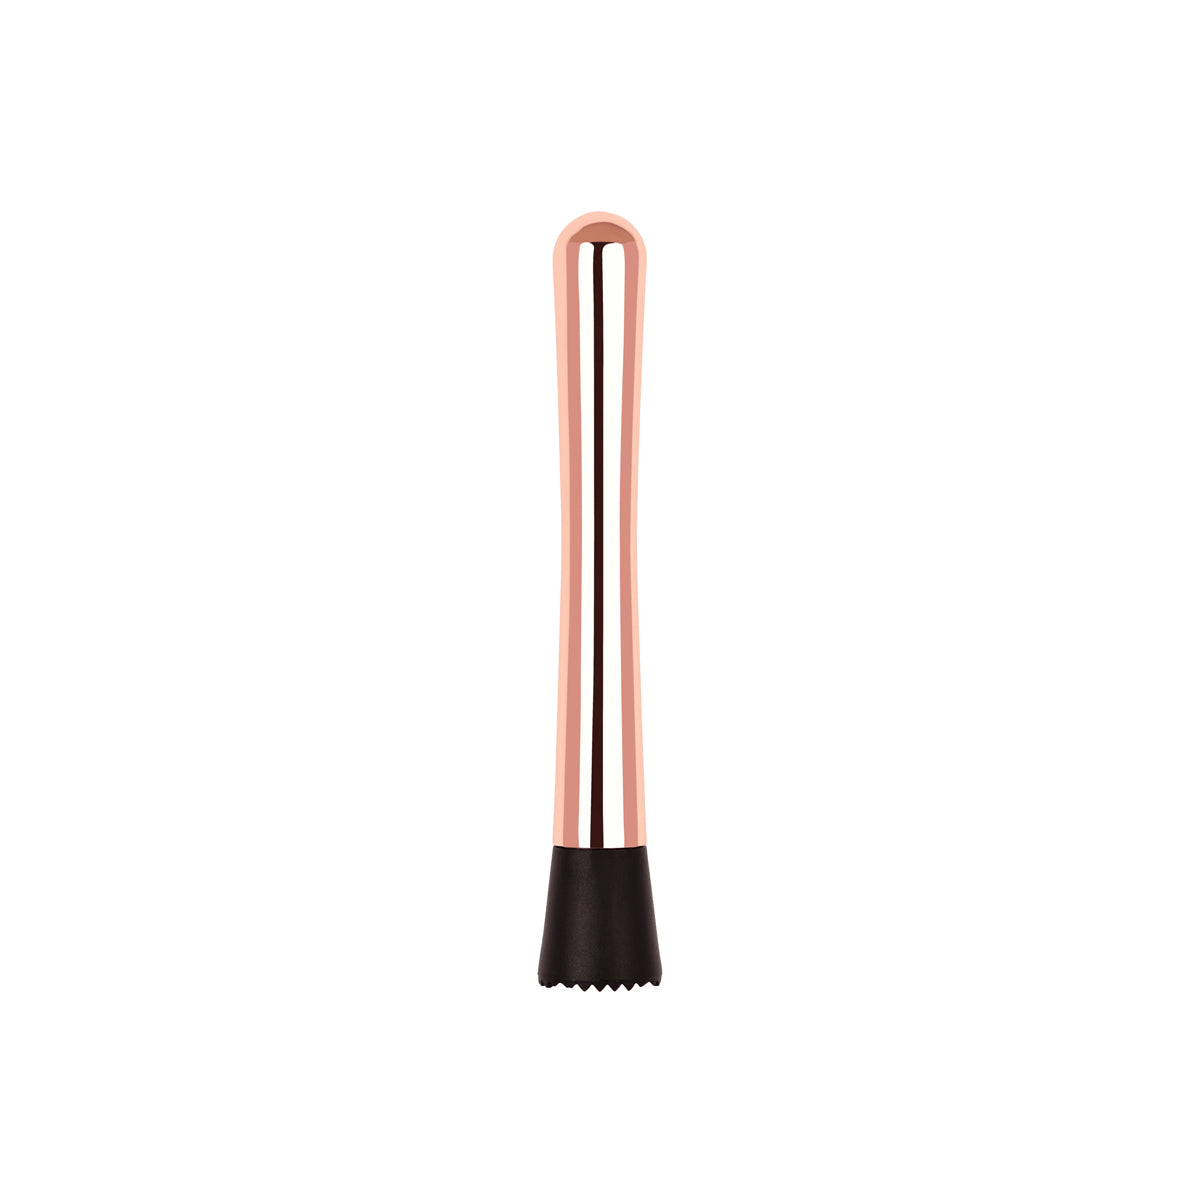 Cocktail Muddler - Rose Gold from Zanzi. Packed in a gift box and sold in boxes of 1. Hospitality quality at wholesale price with The Flying Fork! 